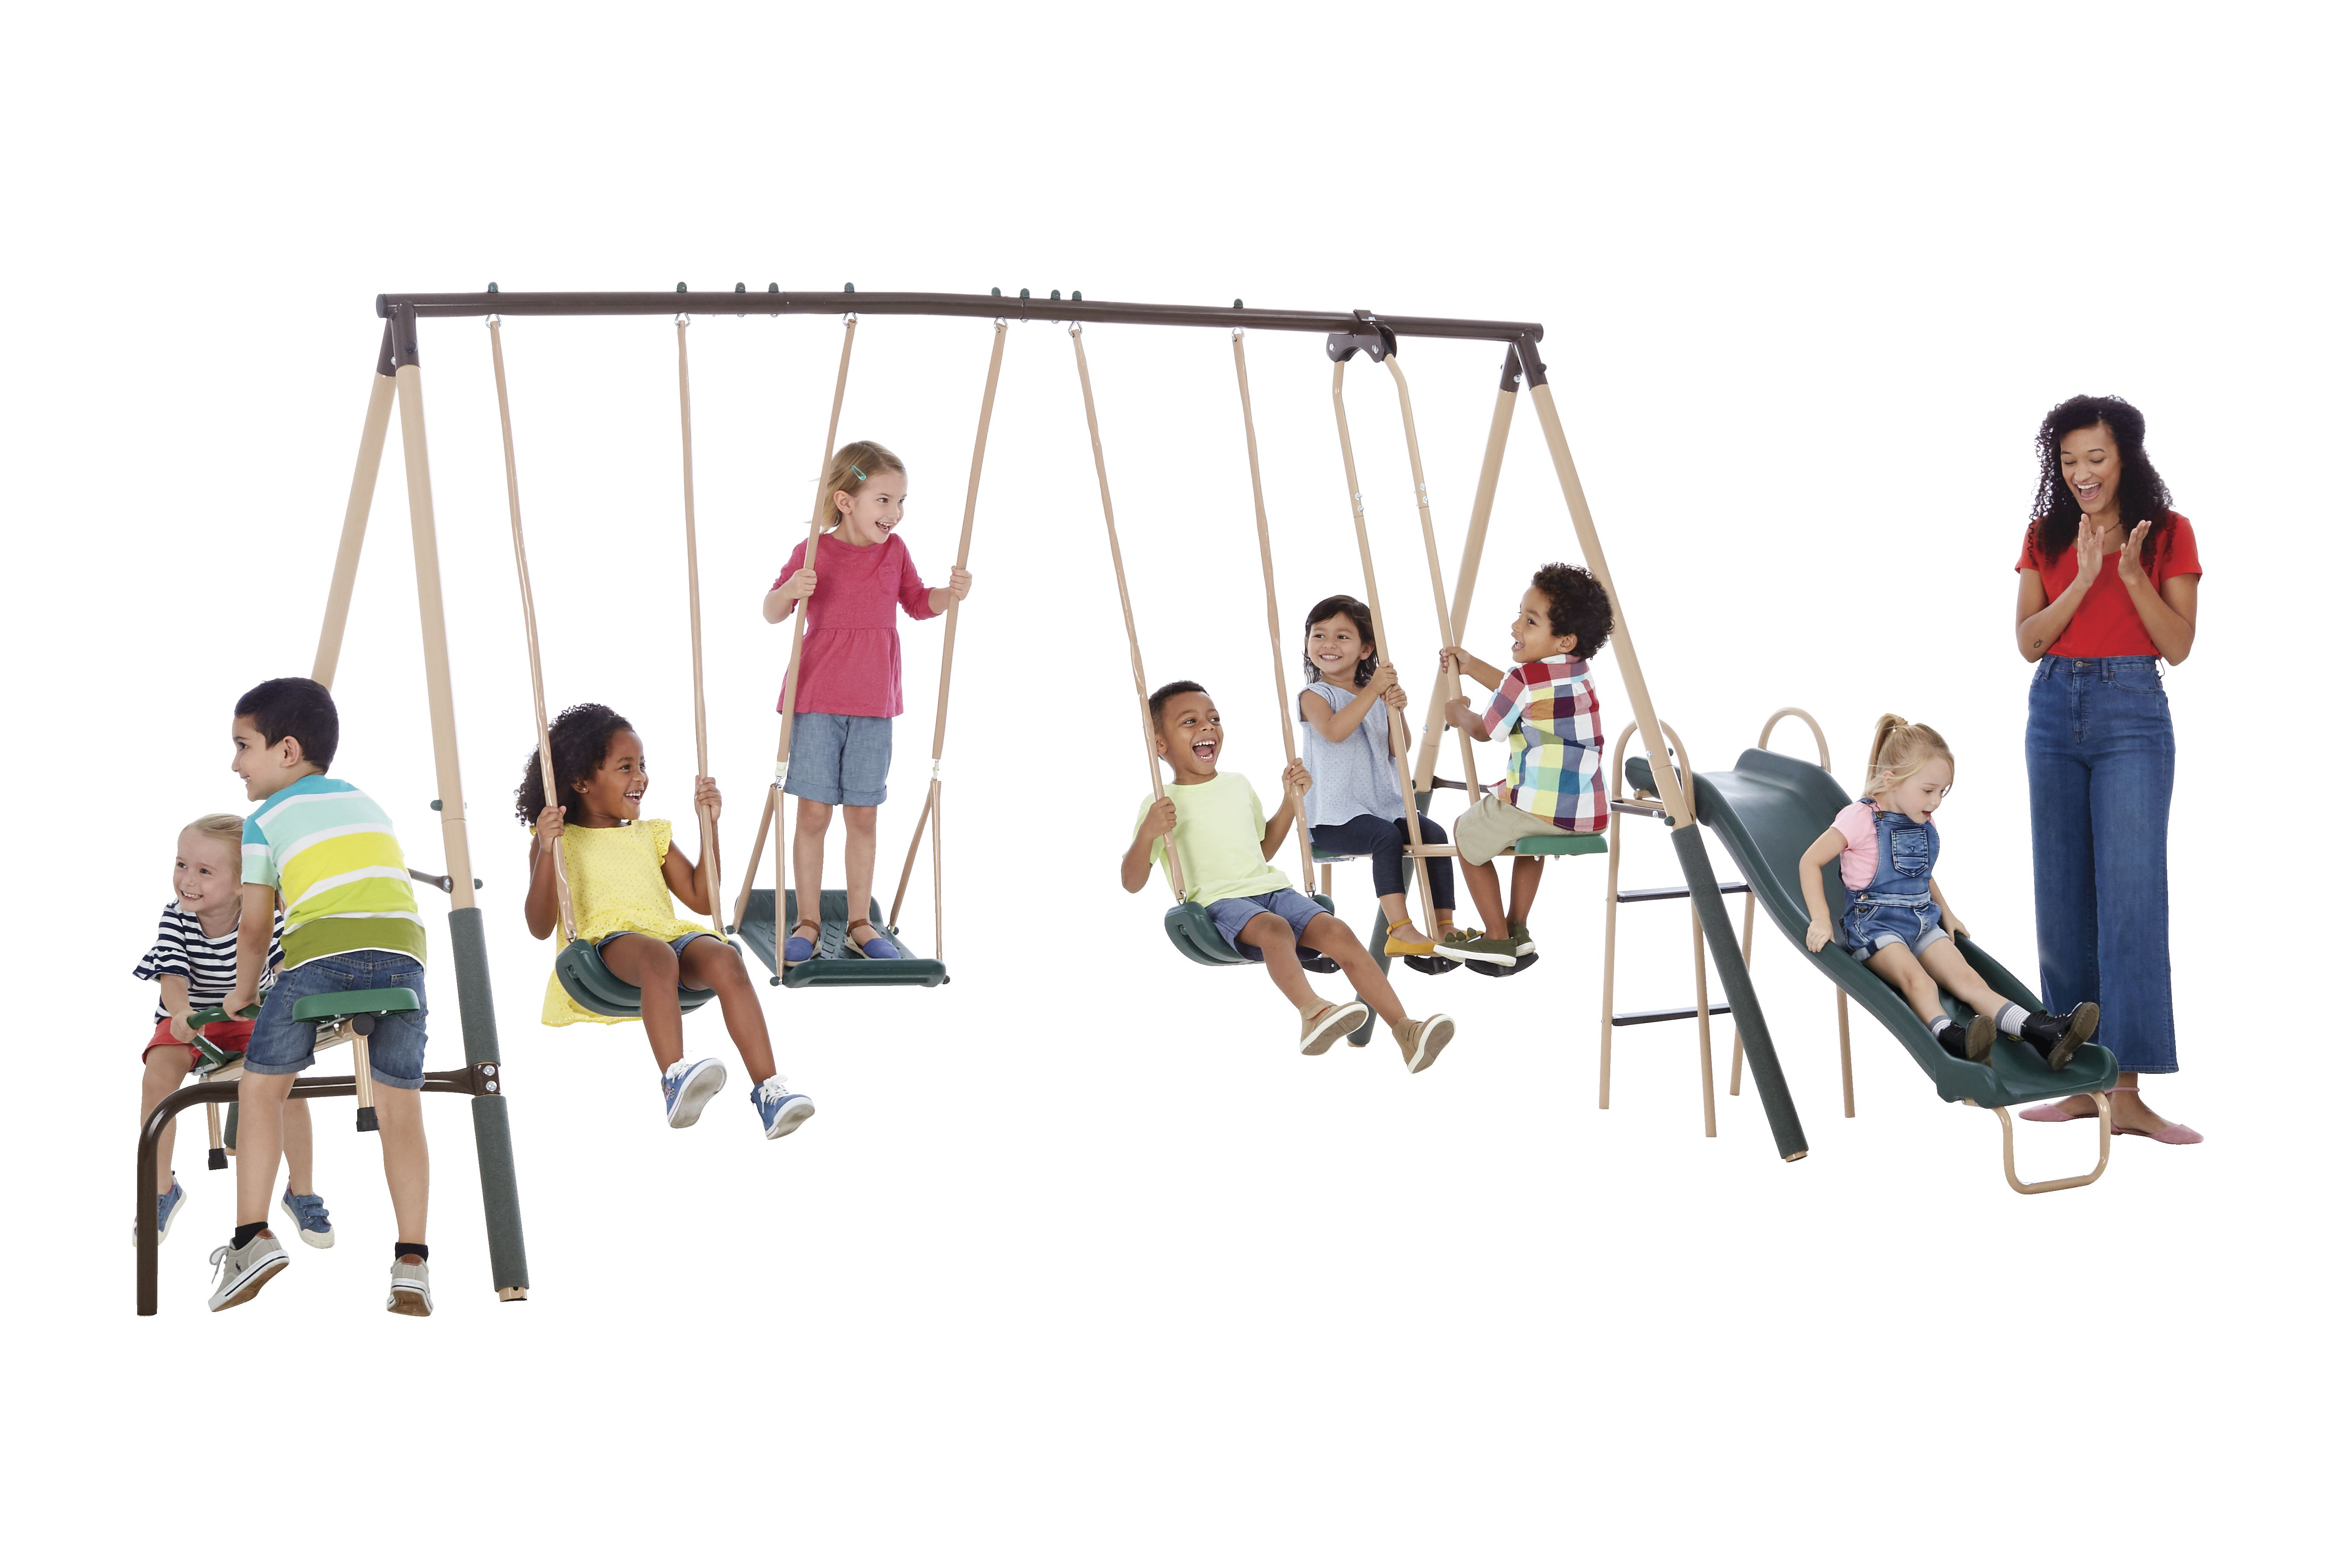 Crestview Swing Set by XDP Recreation with 2 Swing Seats, Stand R Swing, Wave Slide, Fun Glider, & See Saw - image 1 of 7